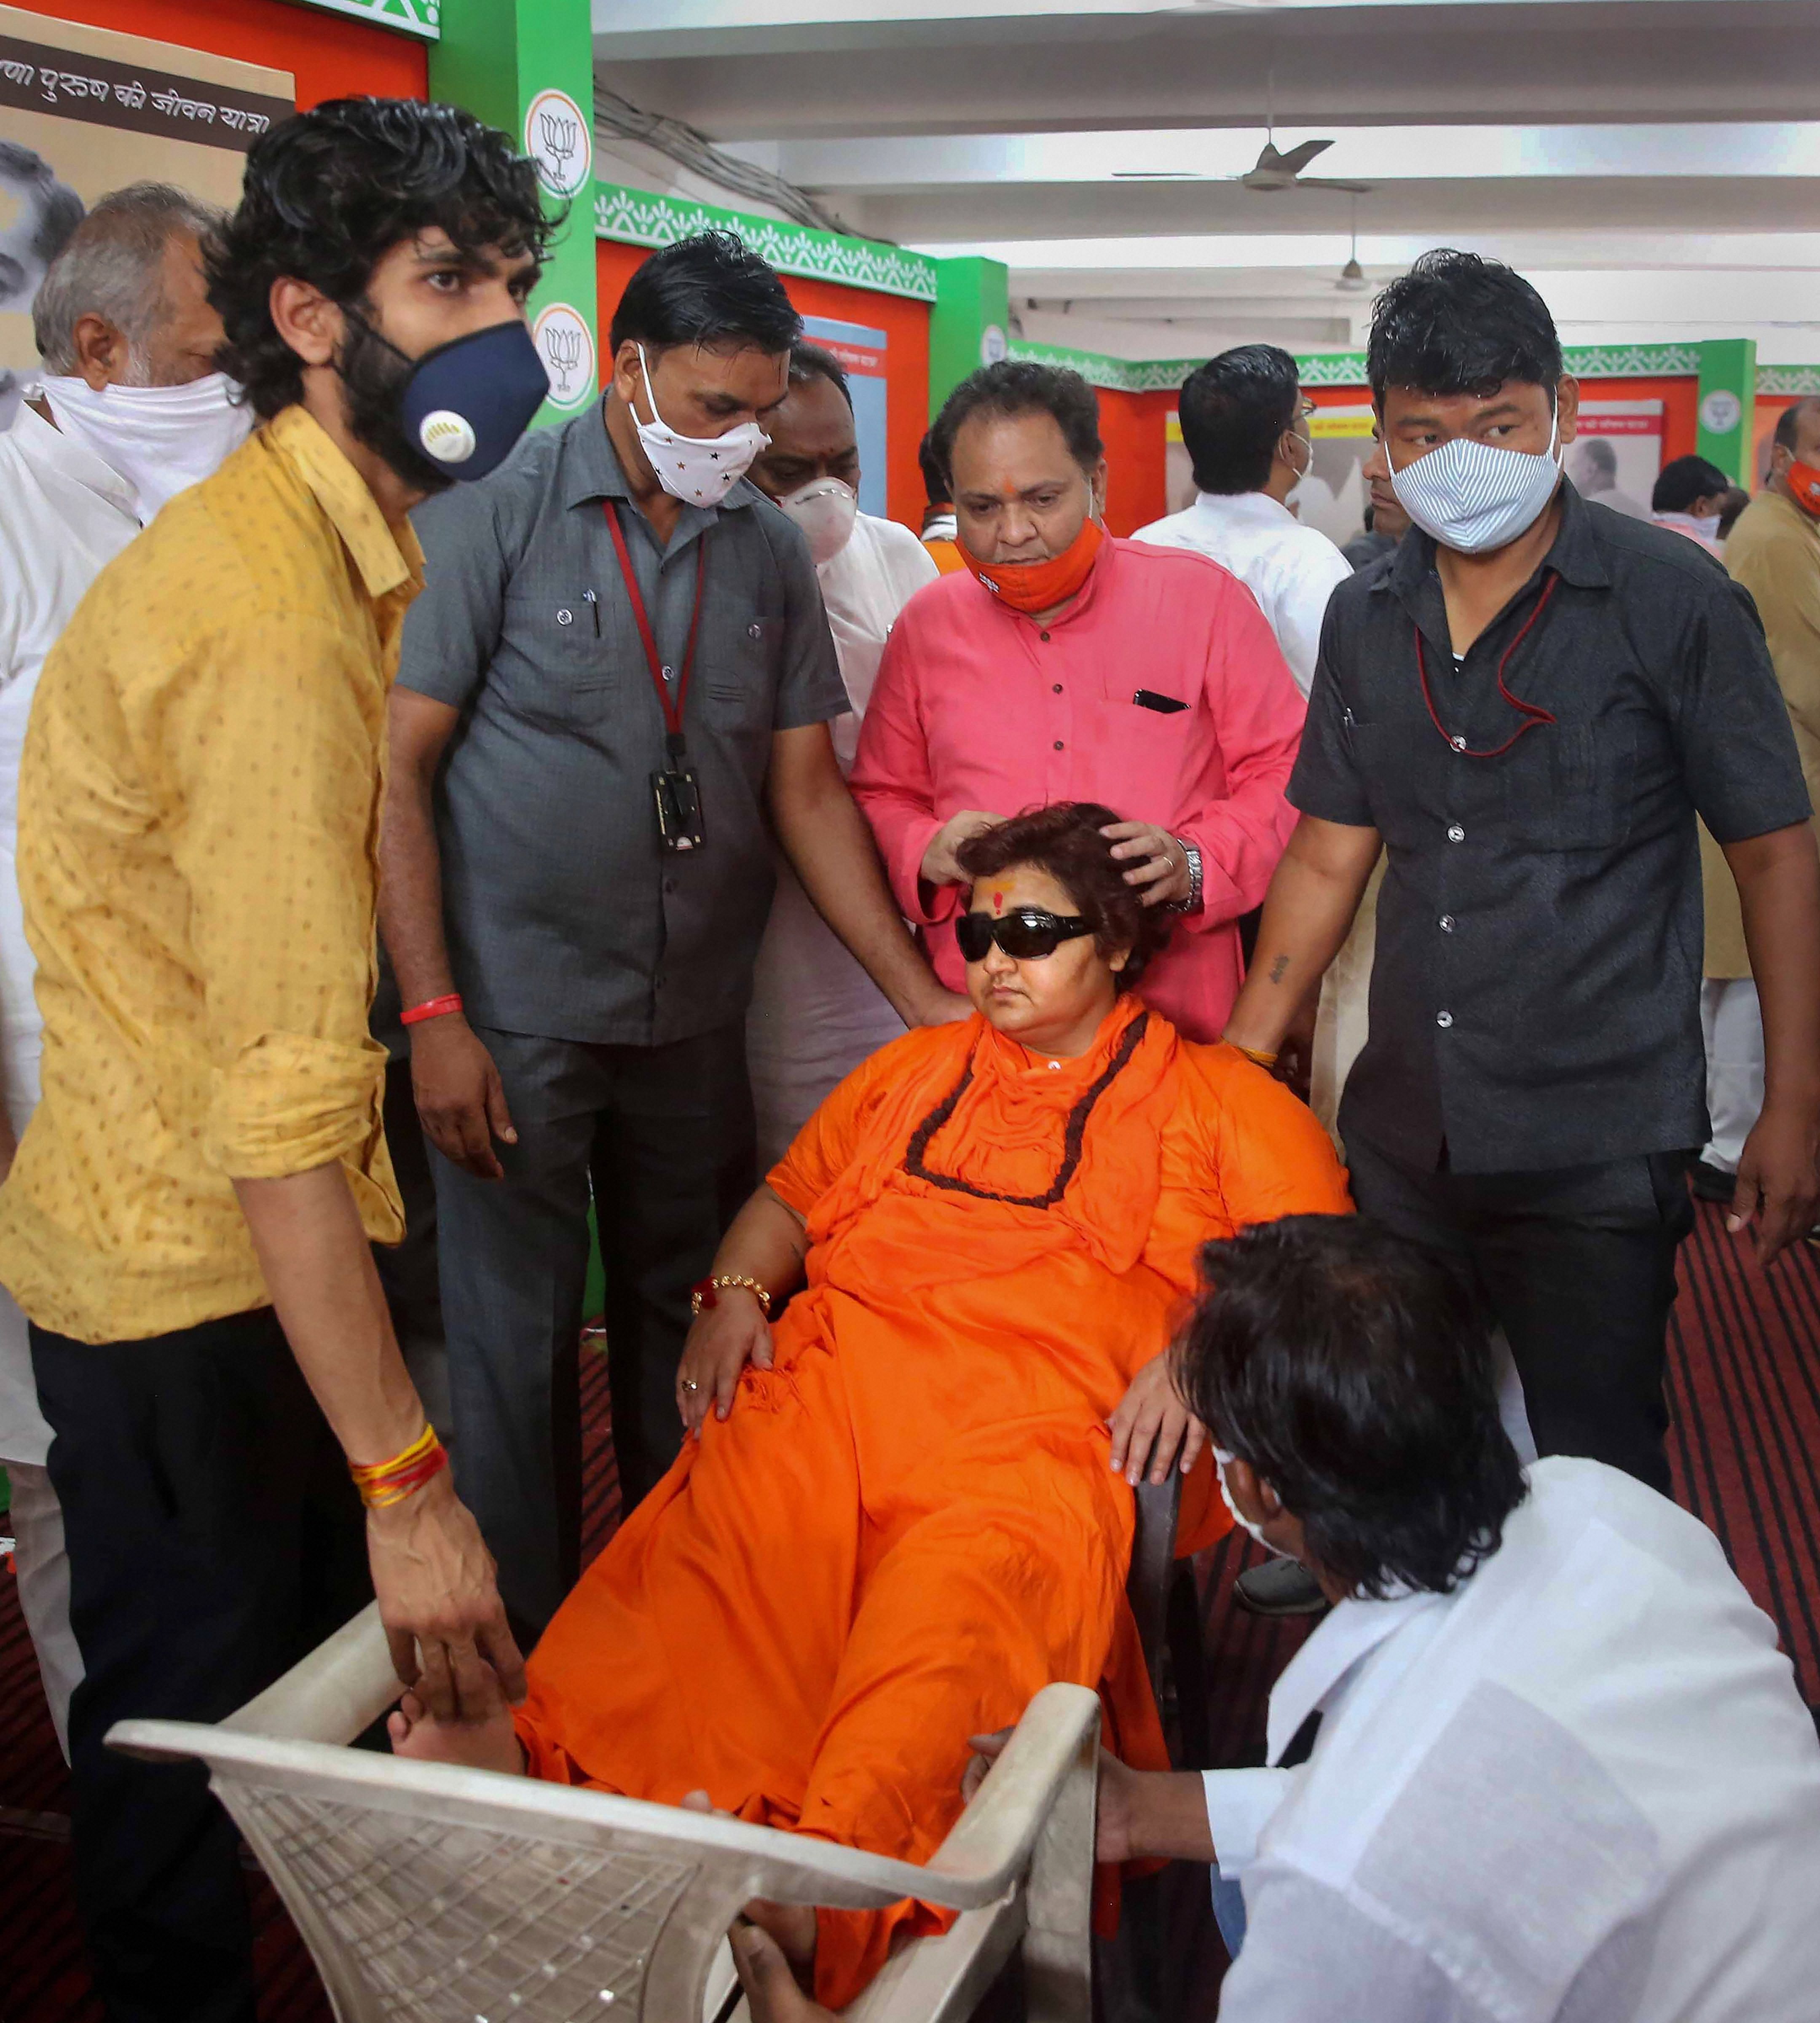 BJP MP from Bhopal Sadhvi Pragya Singh Thakur takes rest after she complained of uneasiness during the inauguration of a photo exhibition on life history of Jansangh founder leader Pt Shyama Prasad Mookerjee, organised on his death anniversary, at BJP State headquarters in Bhopal, Tuesday, June 23, 2020. (PTI Photo)